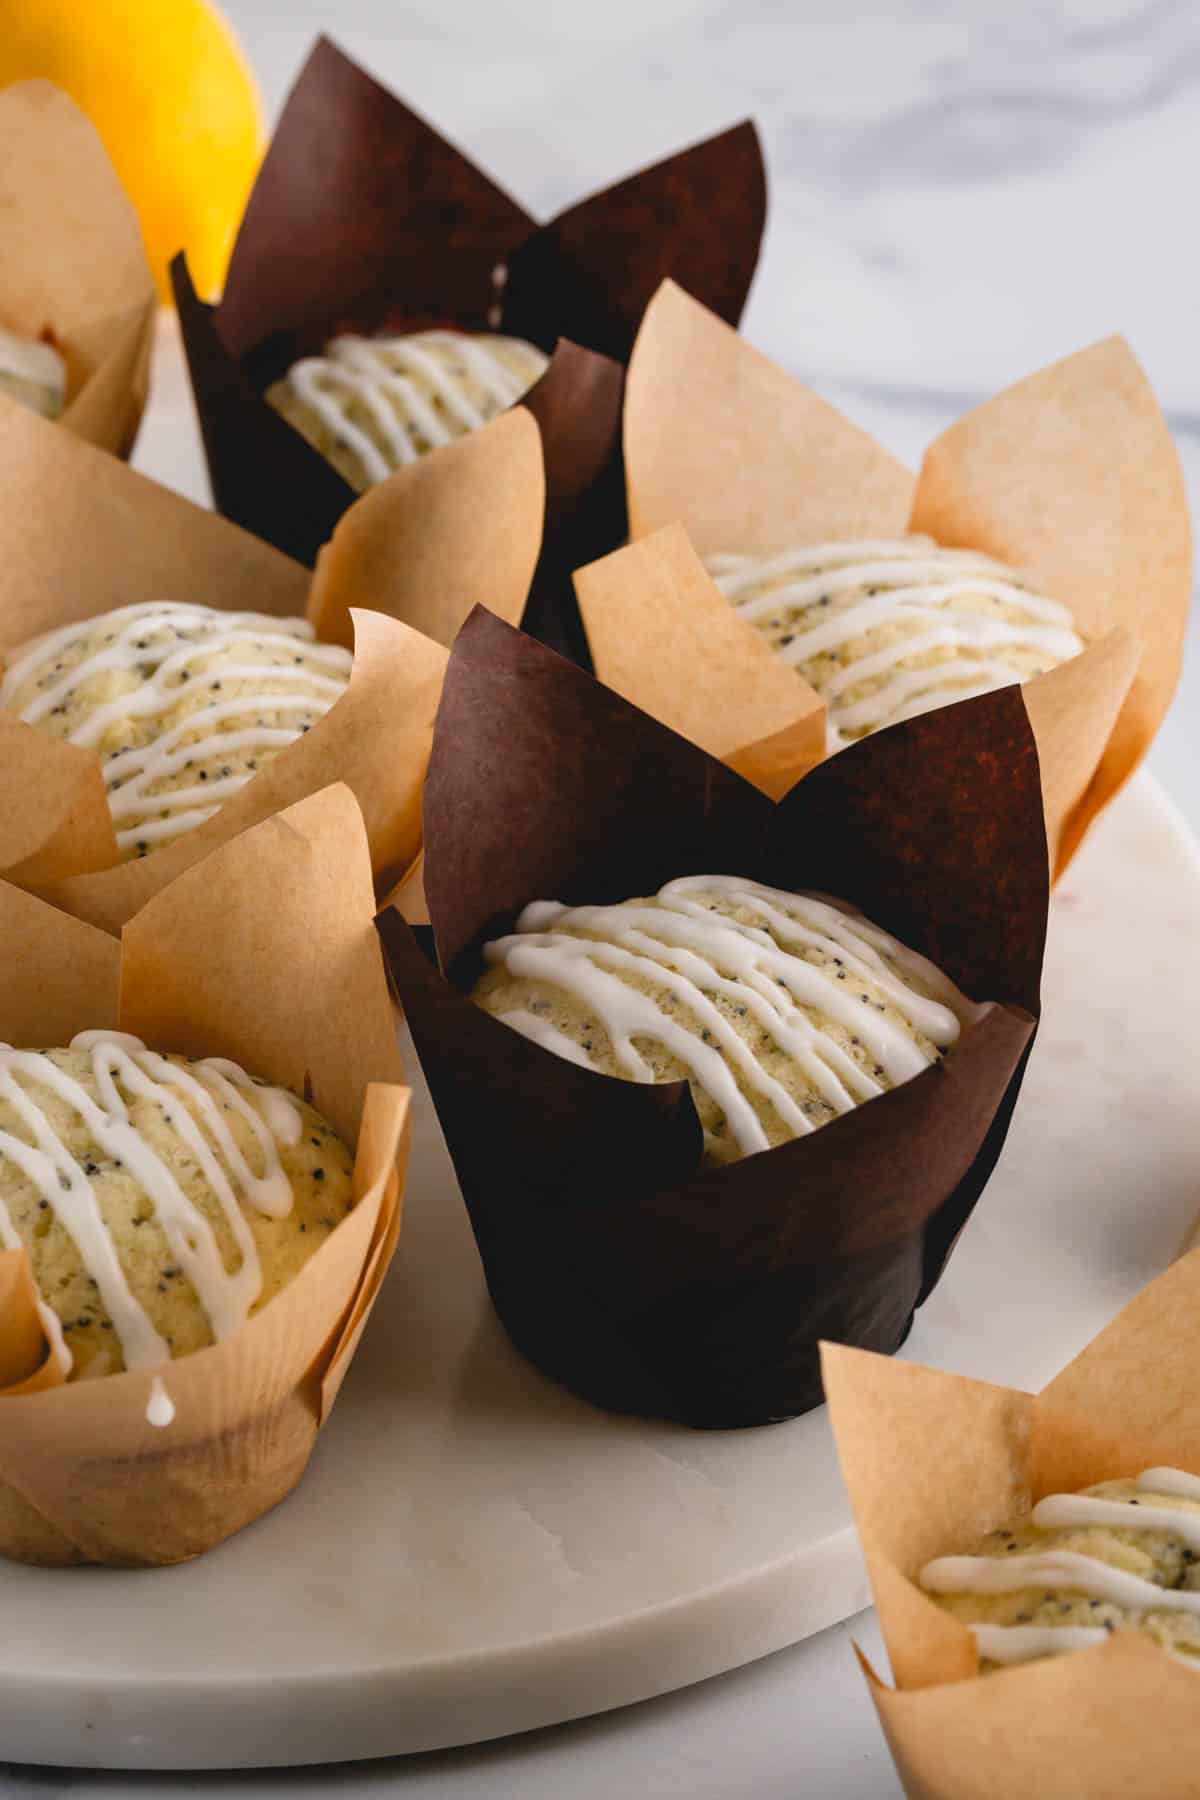 Lemon poppy seed muffins in wrappers topped with a lemon glaze.